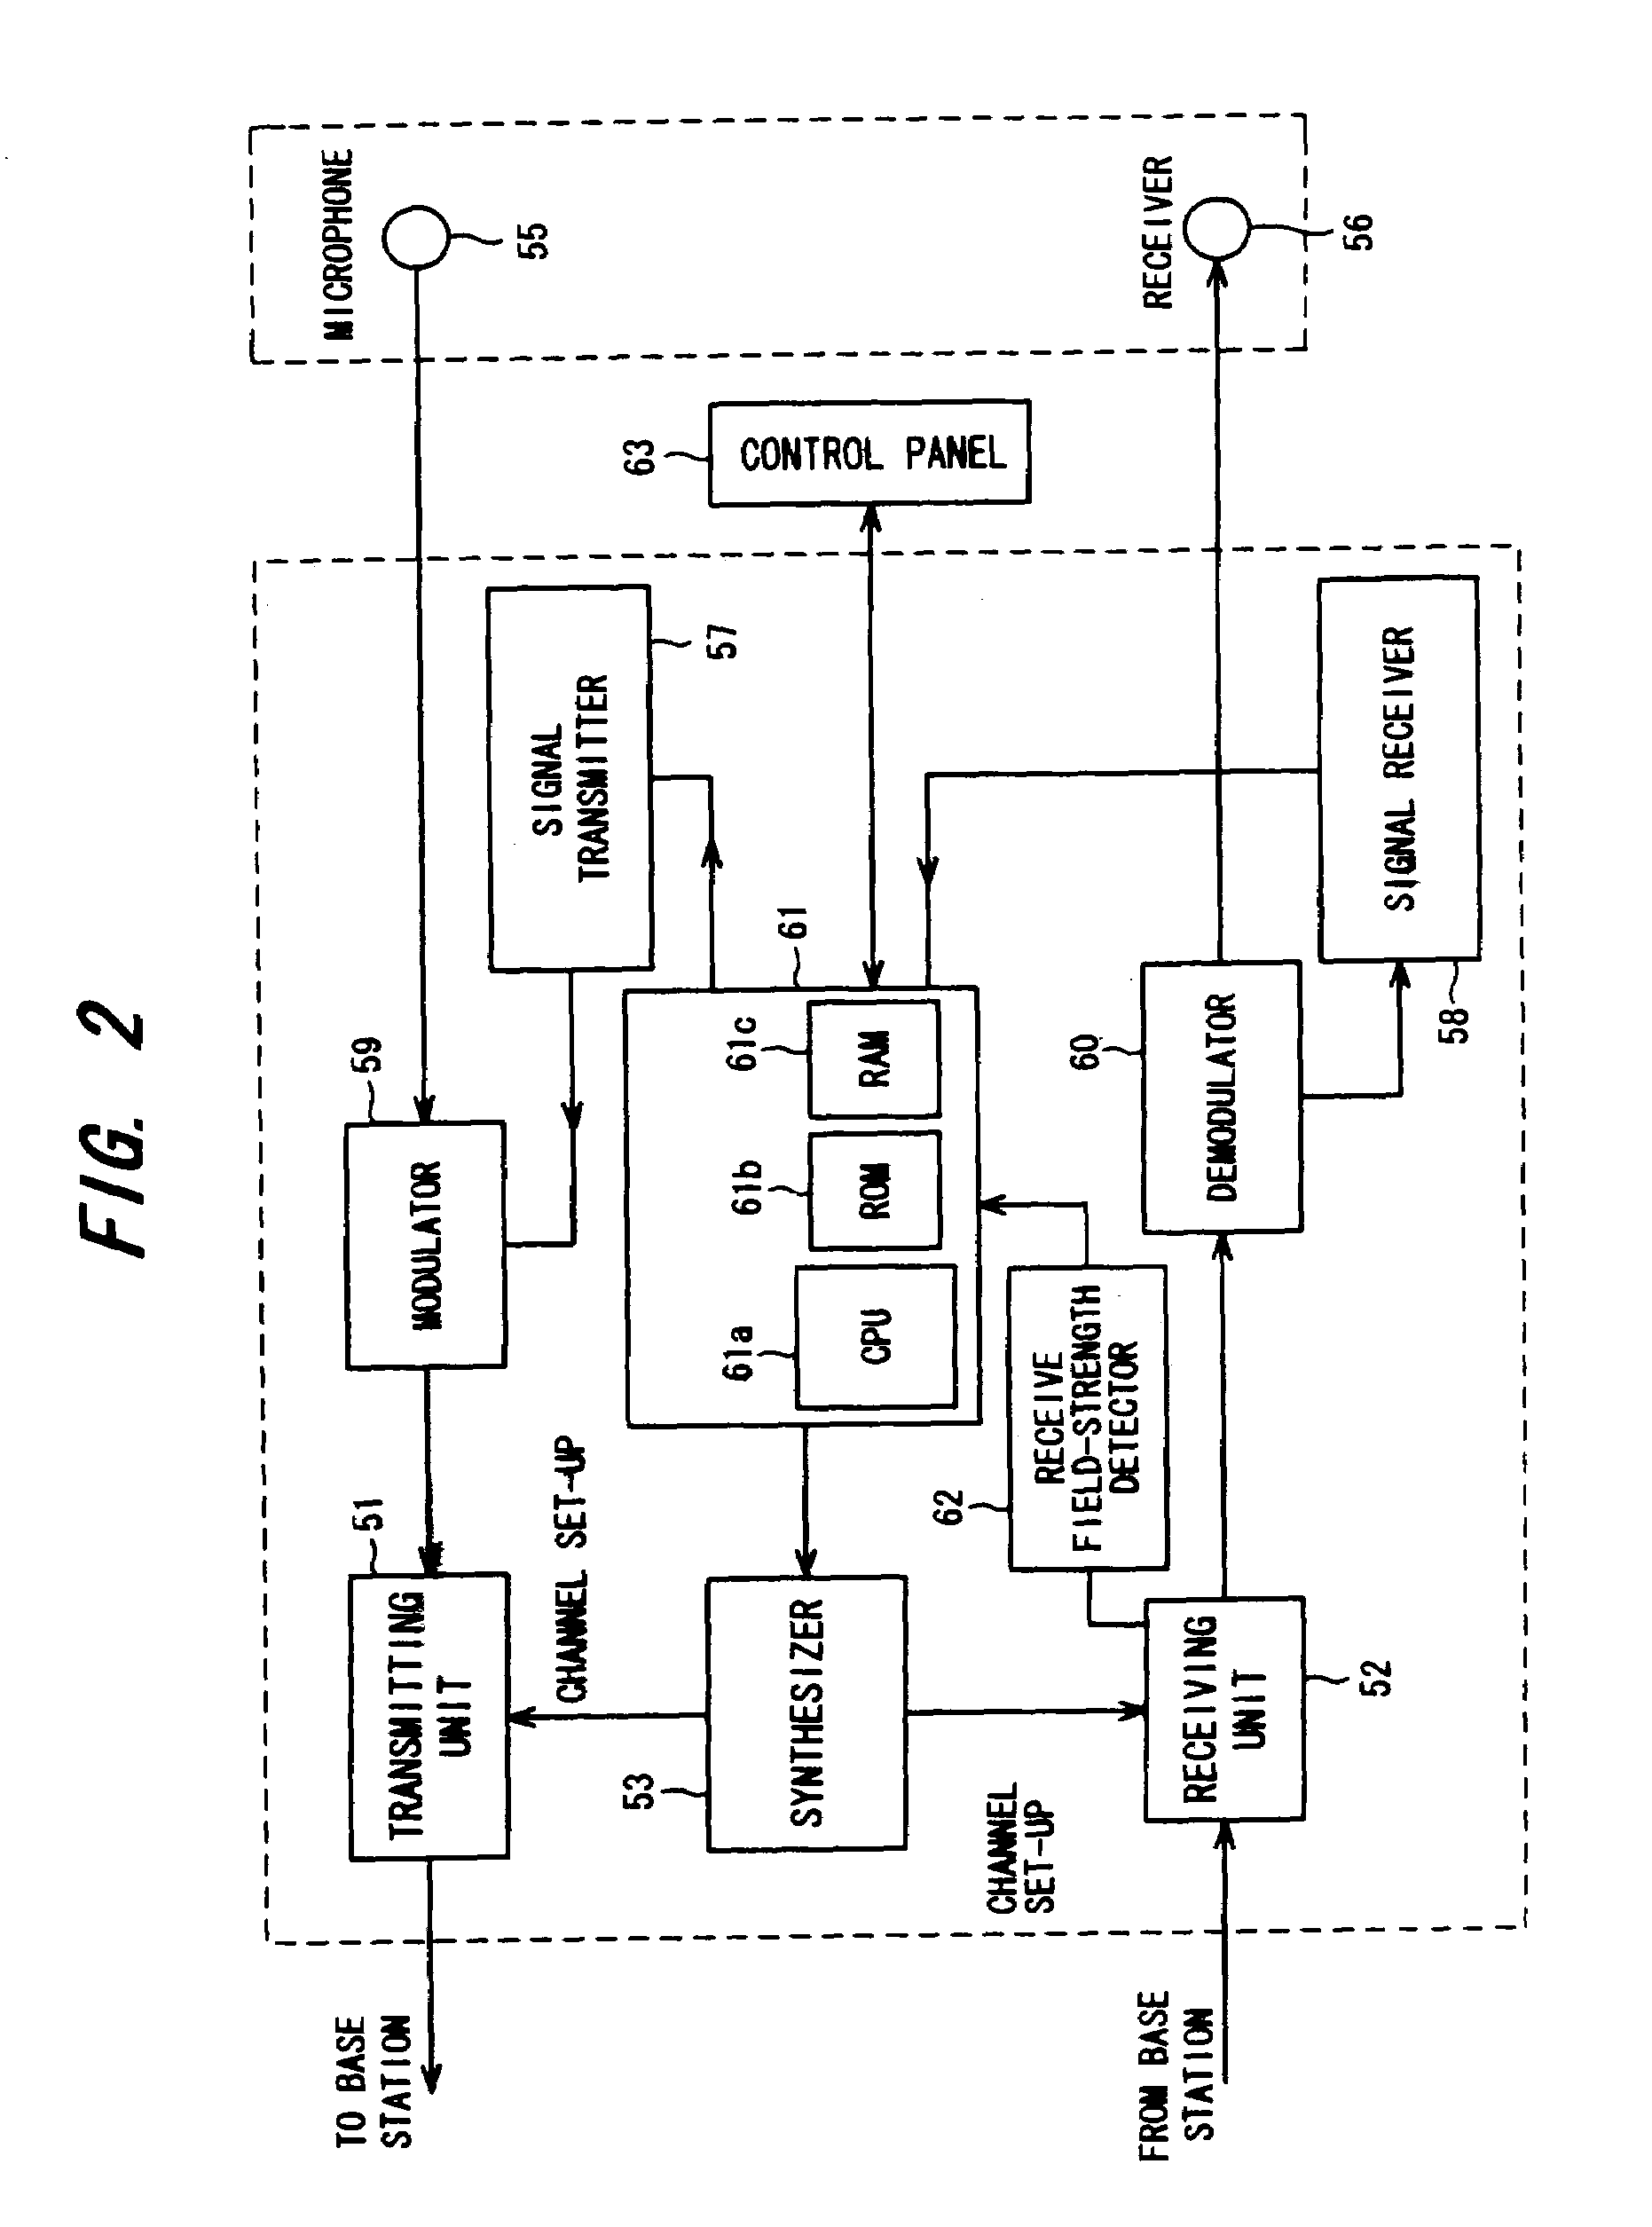 Mobile radio communication system and method of registering position therein